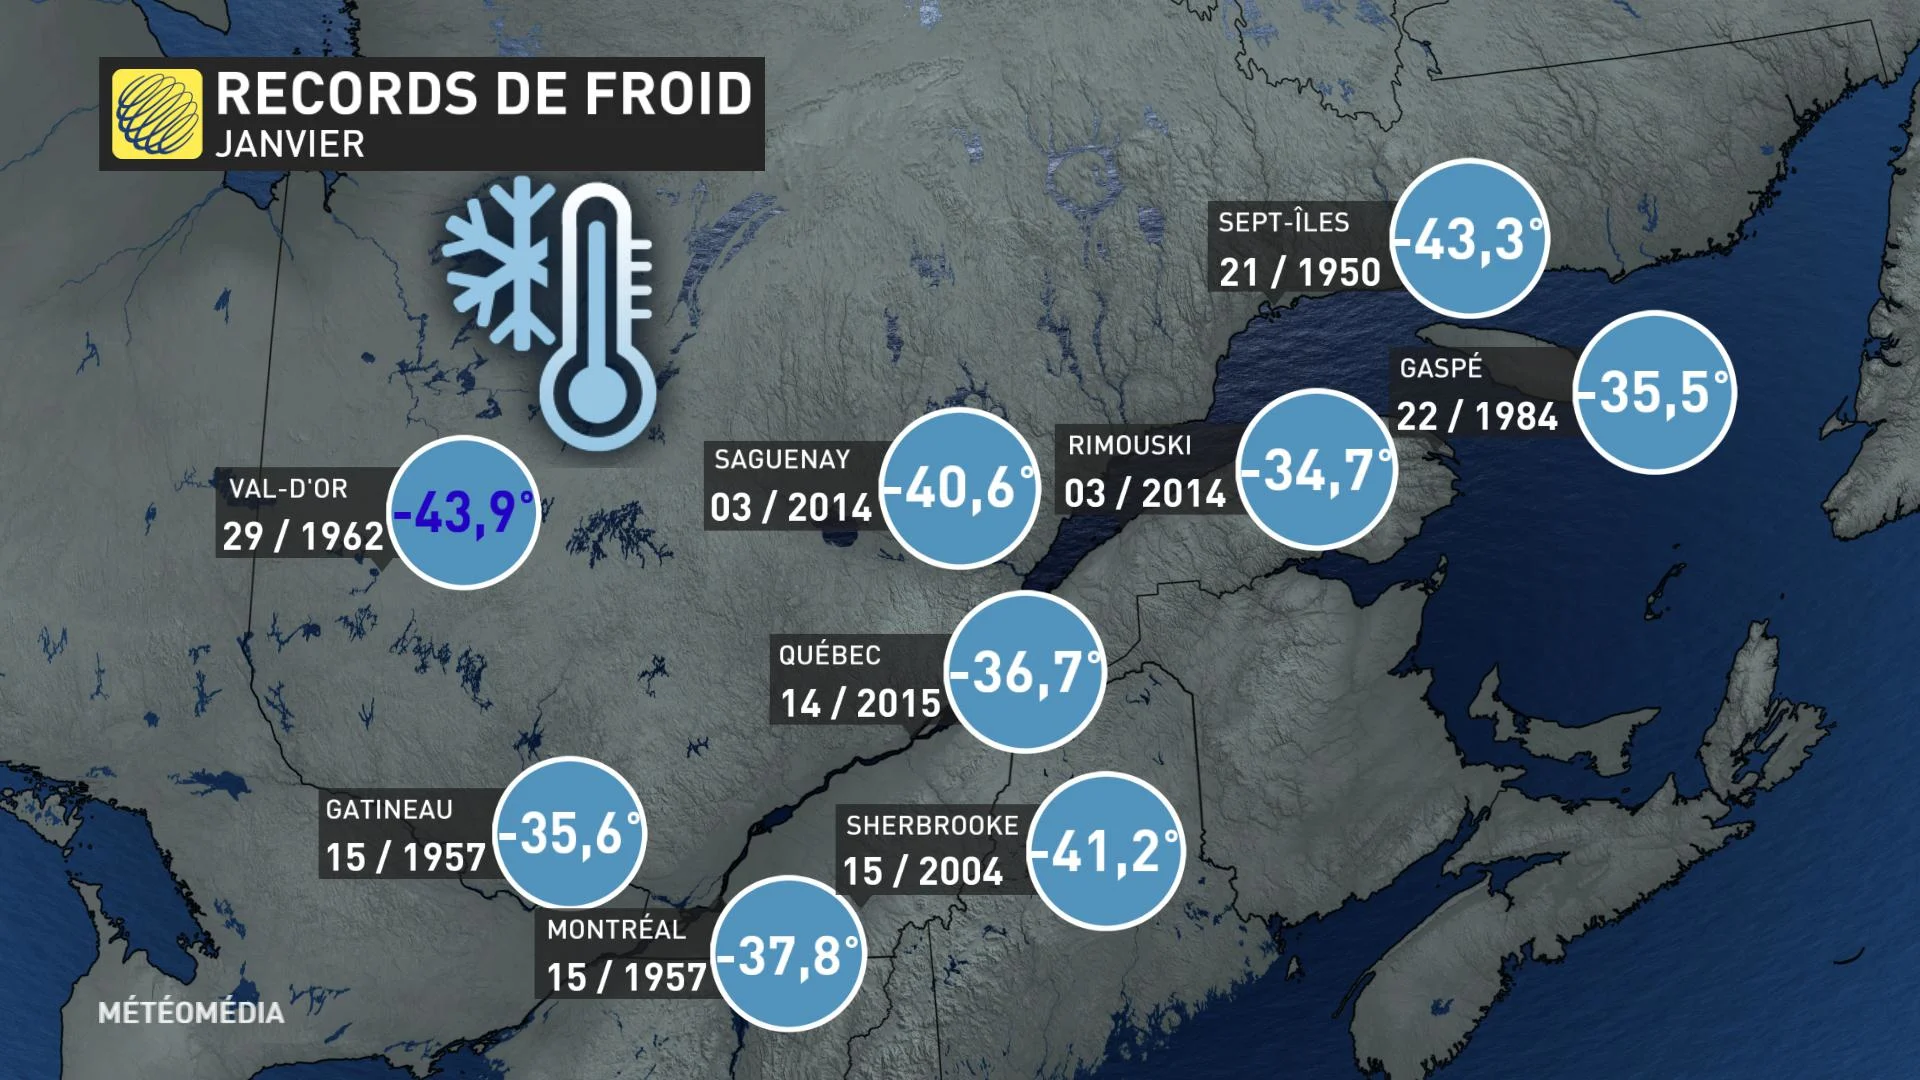 RECORD FROID NEW